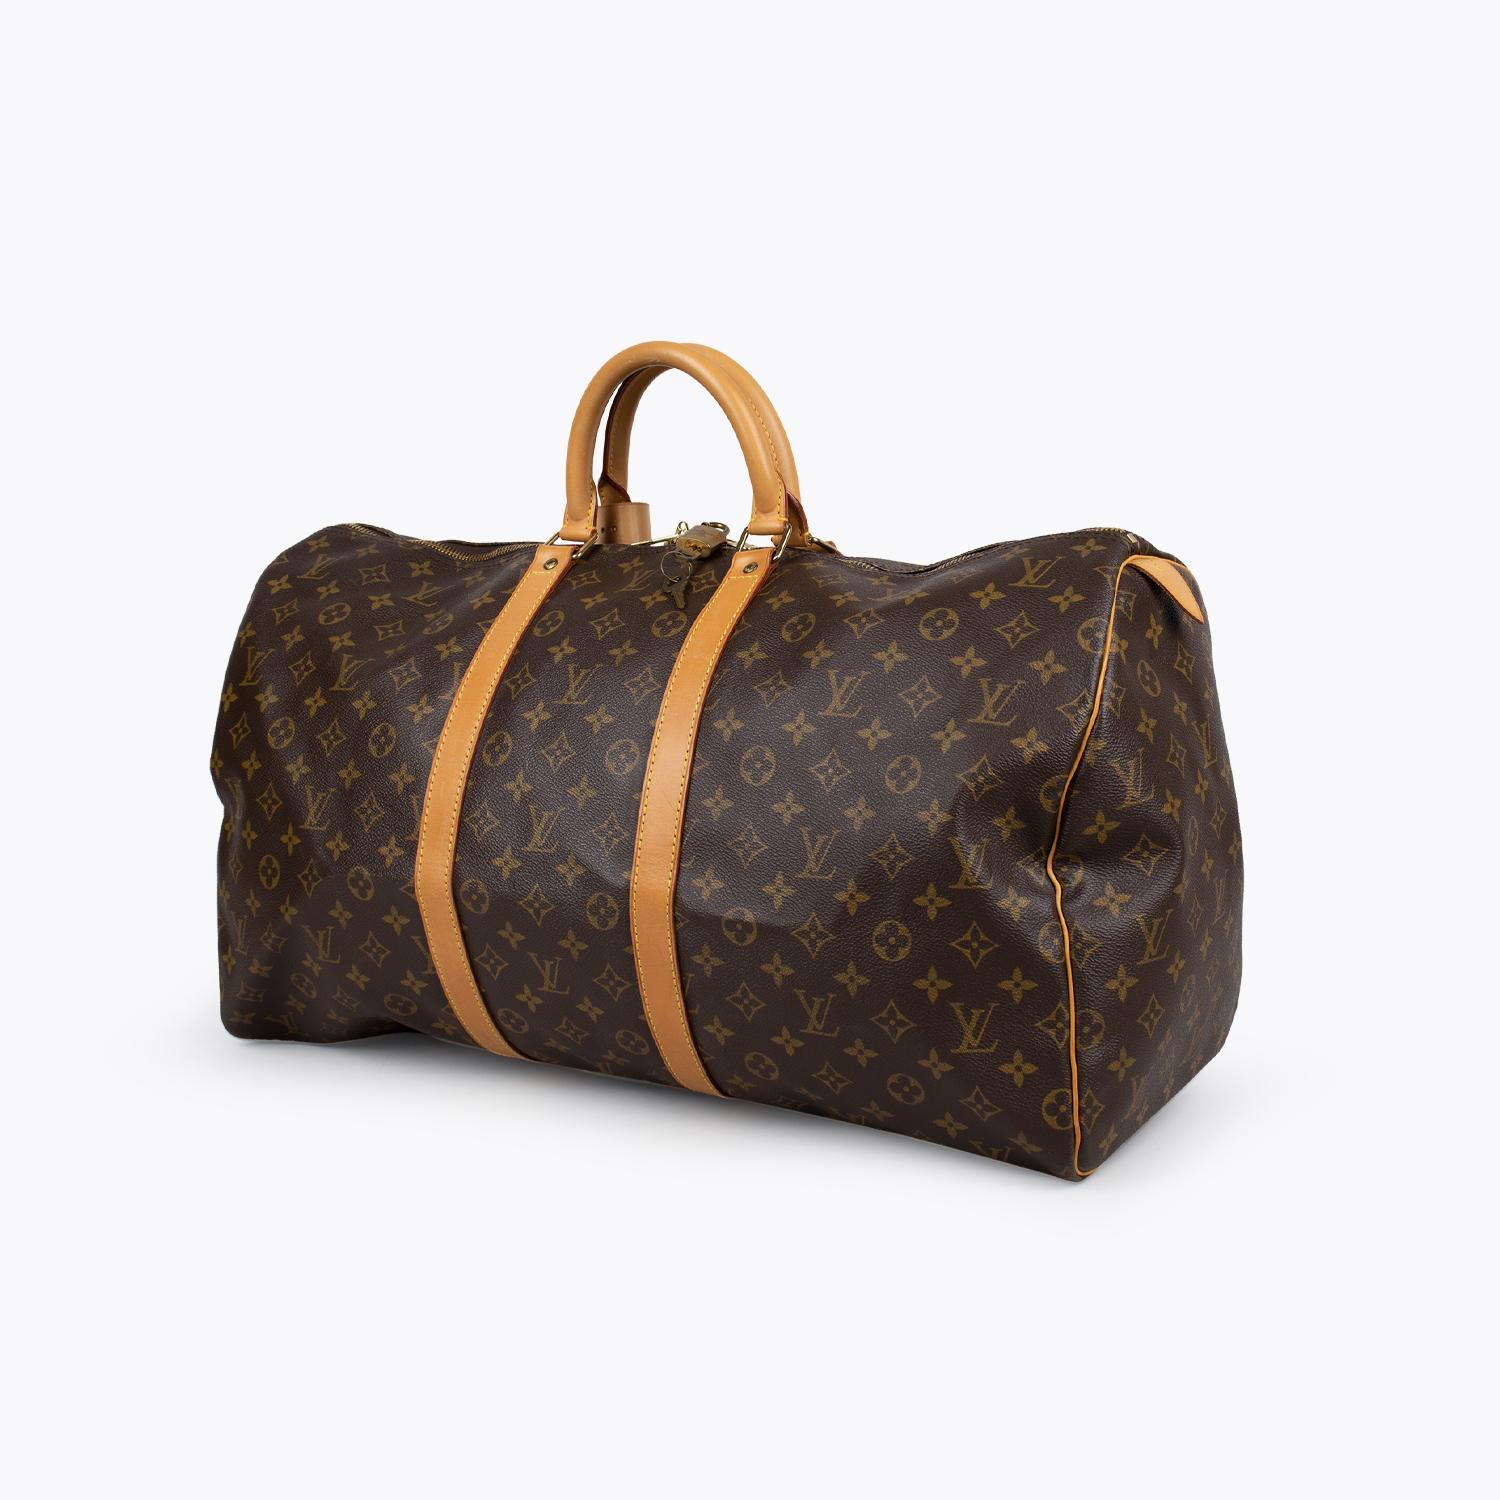 Brown and tan monogram coated canvas Louis Vuitton Keepall Monogram 55 with

- Brass hardware
- Tan vachetta leather trim
- Dual rolled top handles
- Tonal canvas lining and two-way zip closure at top

Overall Preloved Condition: Very Good
Exterior